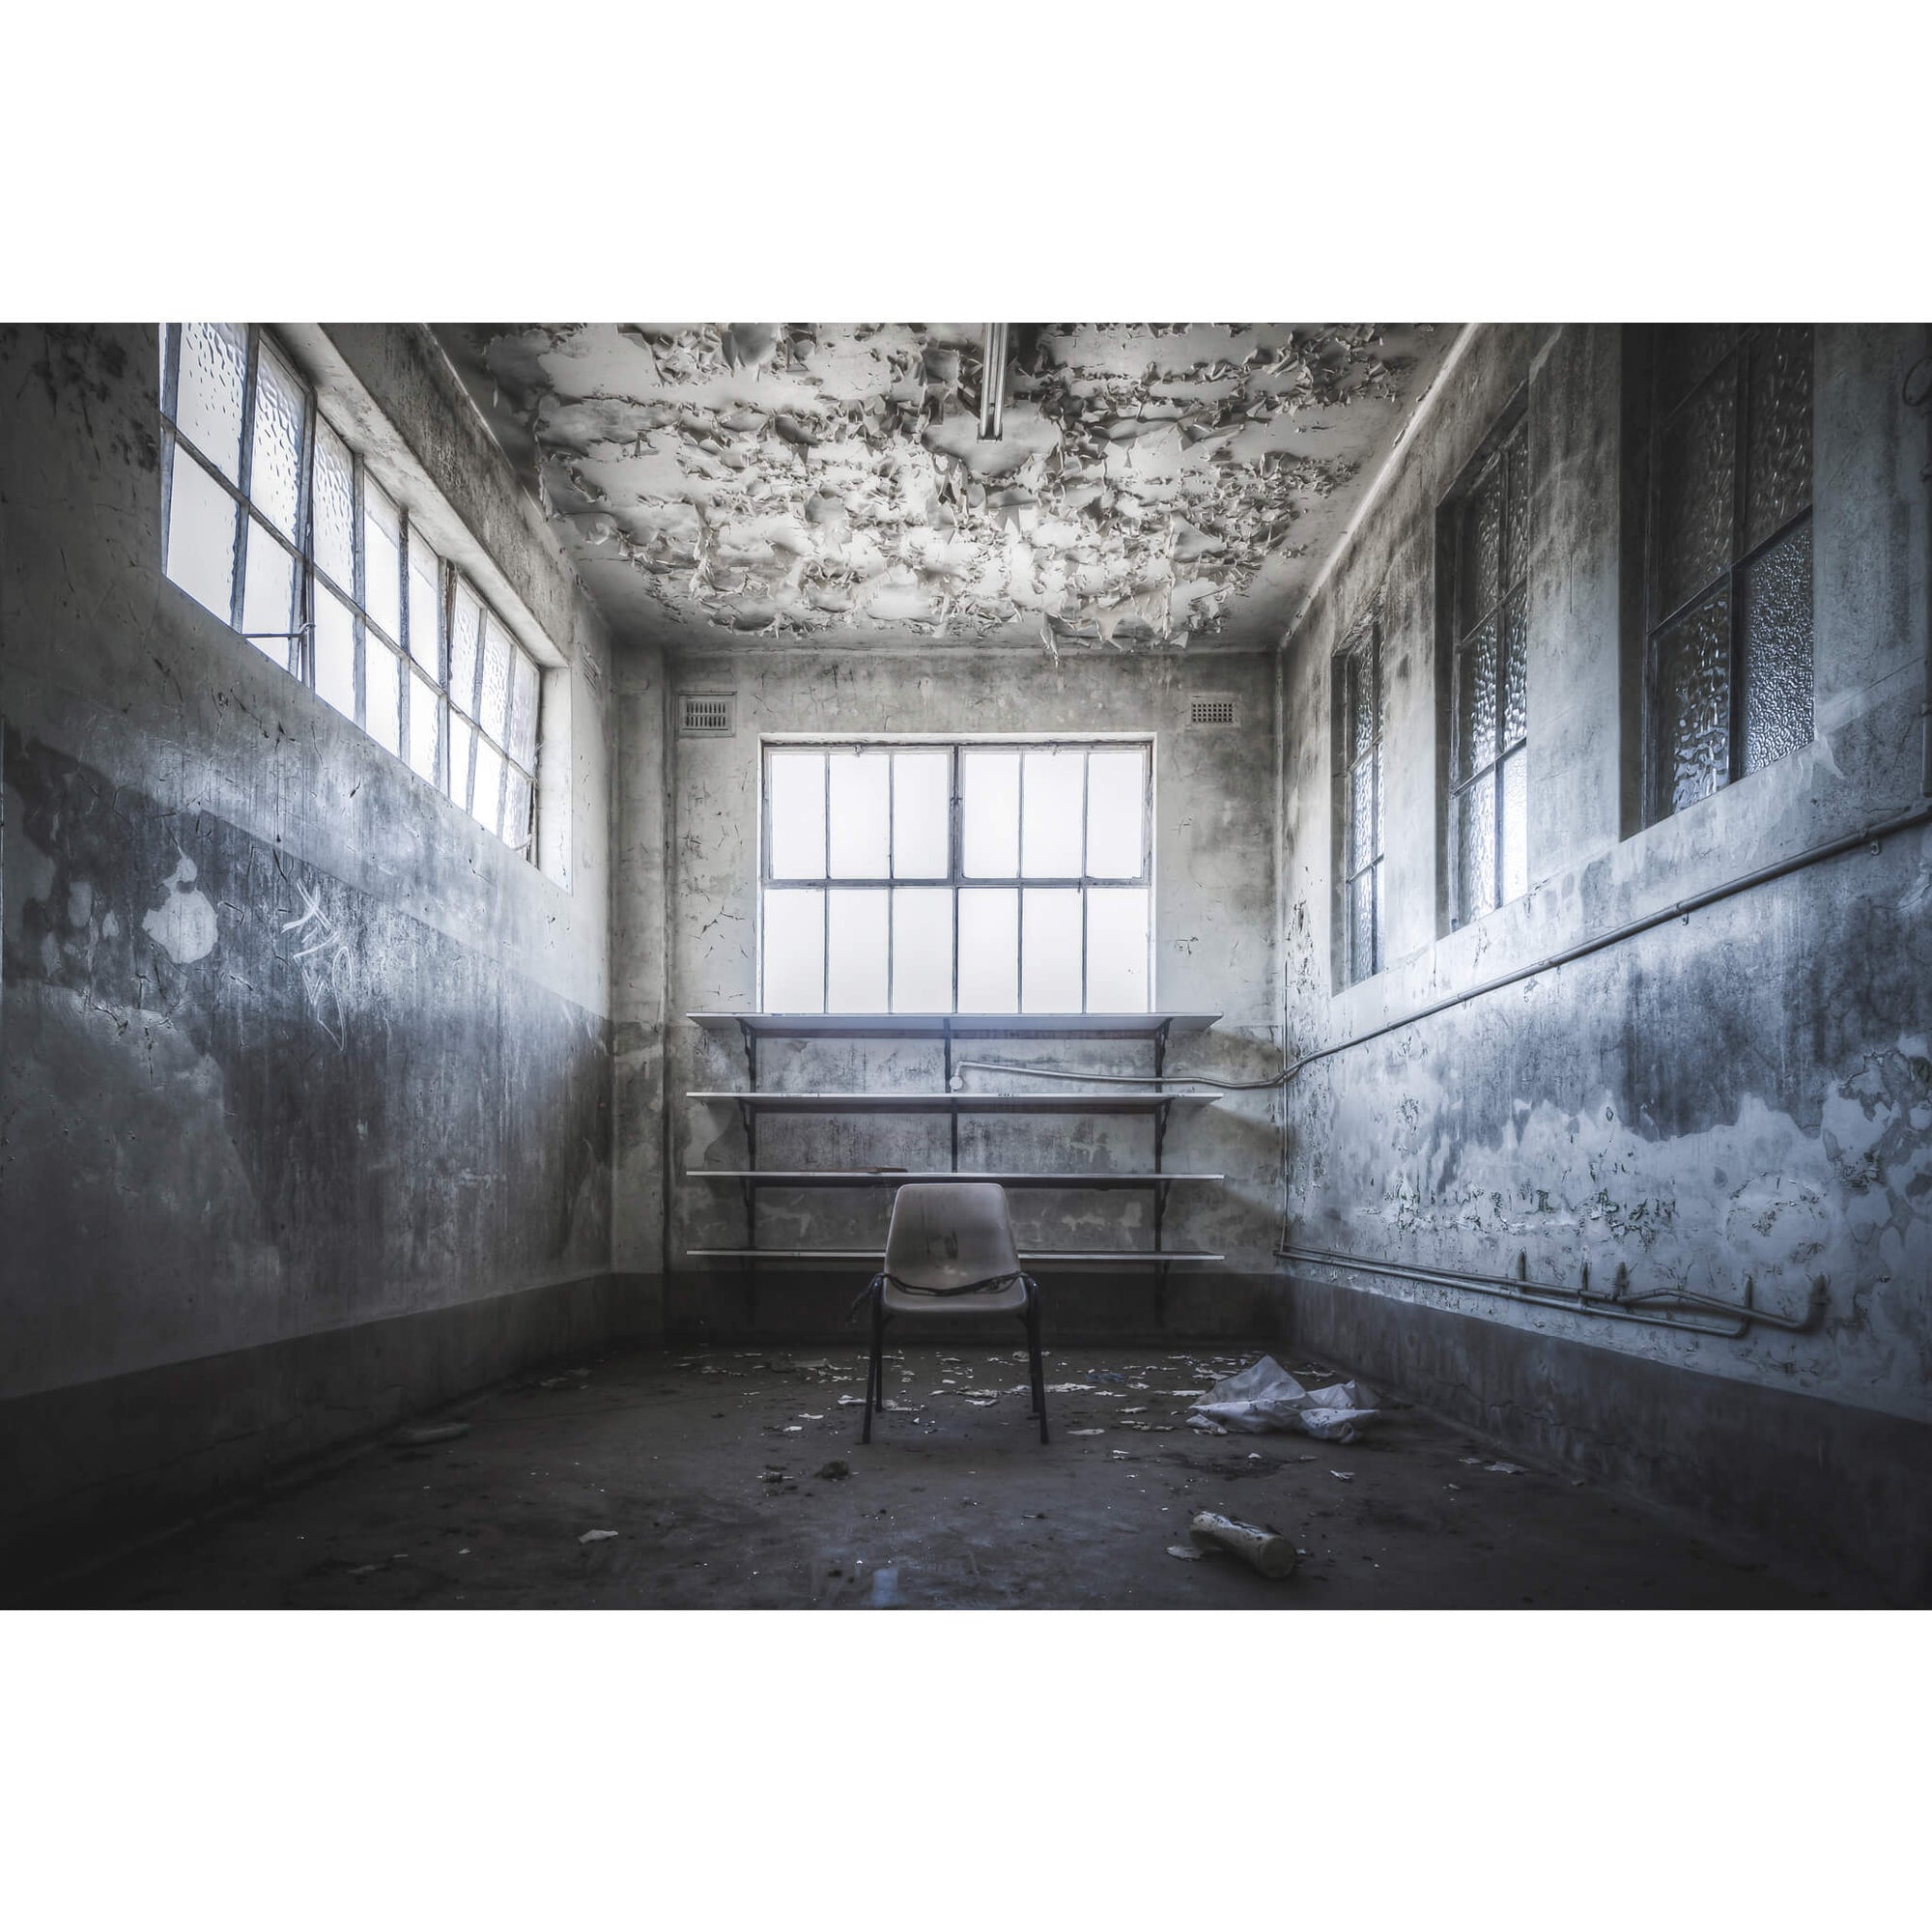 Change Room | Peters' Ice Cream Factory Fine Art Print - Lost Collective Shop